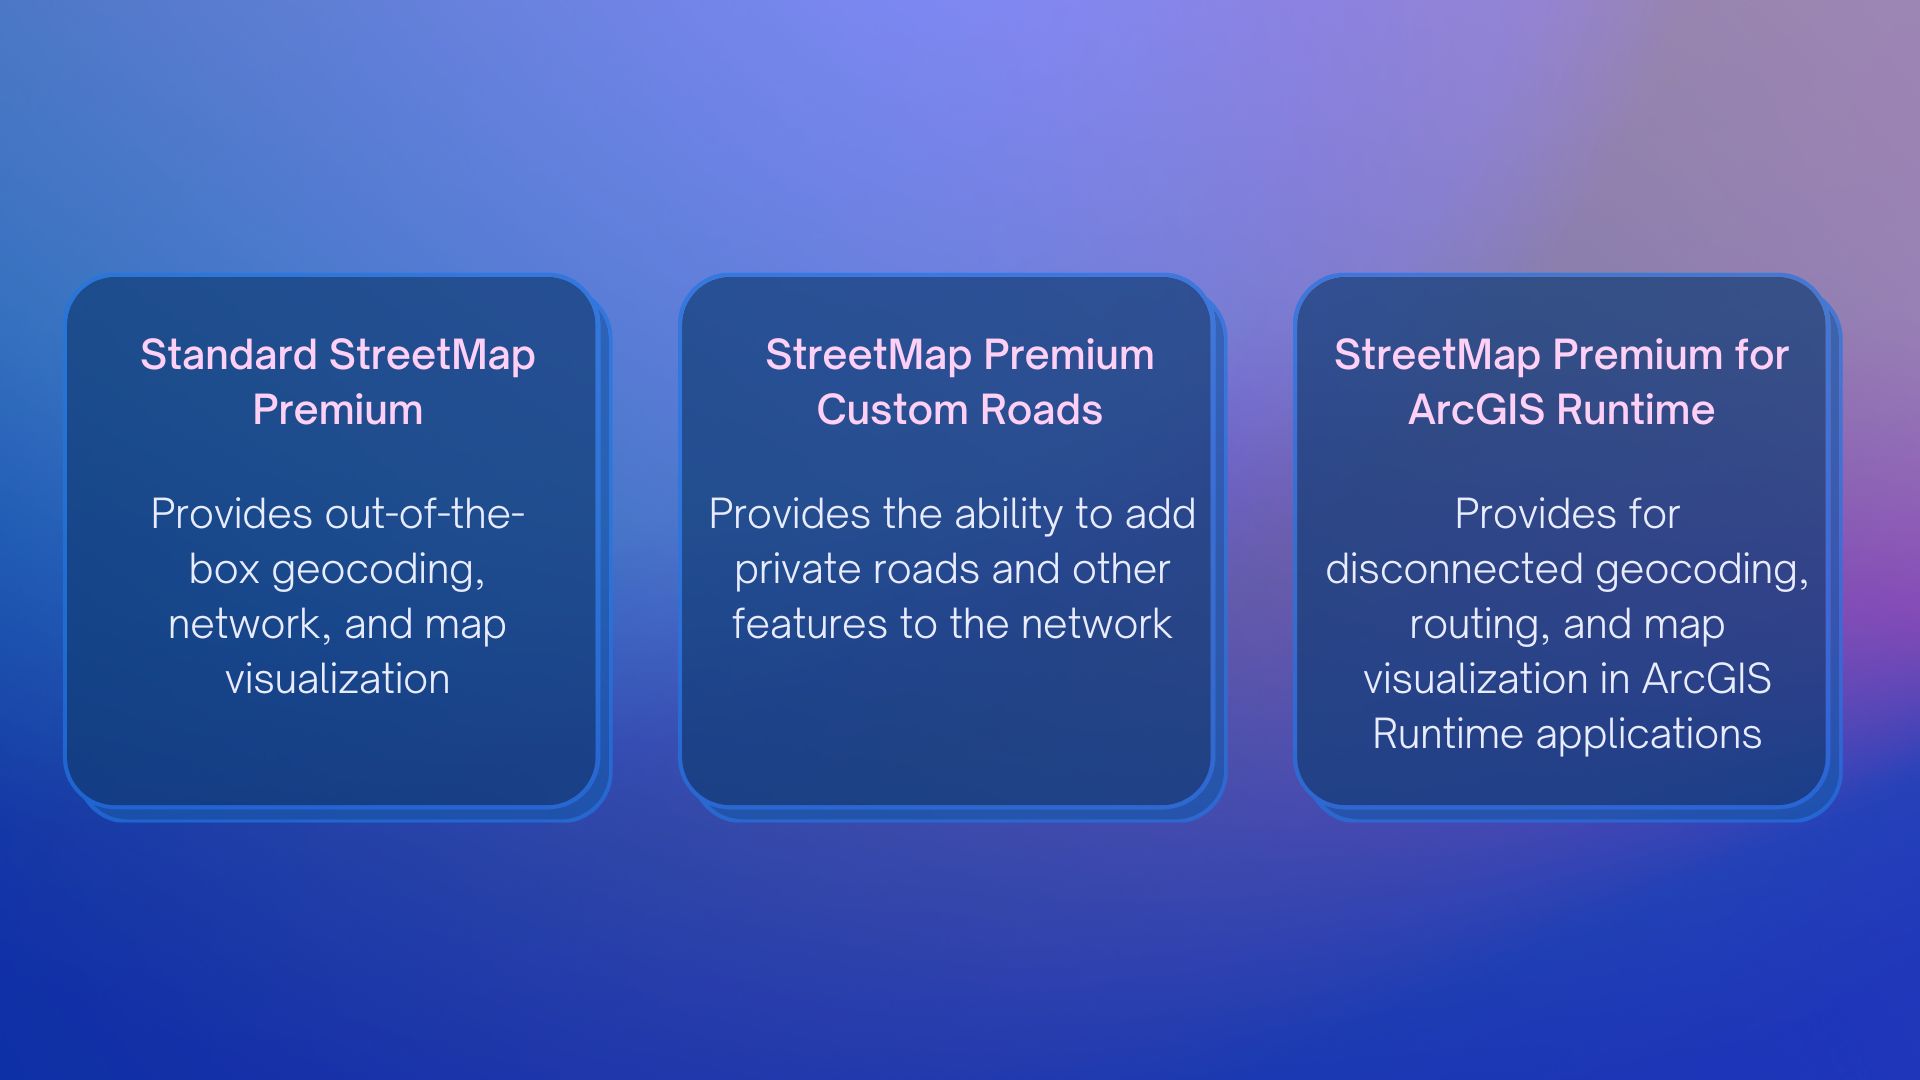 StreetMap Premium Differences. Standard StreetMap Premium: Provides out-of-the-box geocoding, network, and map visualization. StreetMap Premium Custom Roads: Provides the ability to add private roads and other features to the network. StreetMap Premium for ArcGIS Runtime: Provides for disconnected geocoding, routing, and map visualization in ArcGIS Runtime applications.